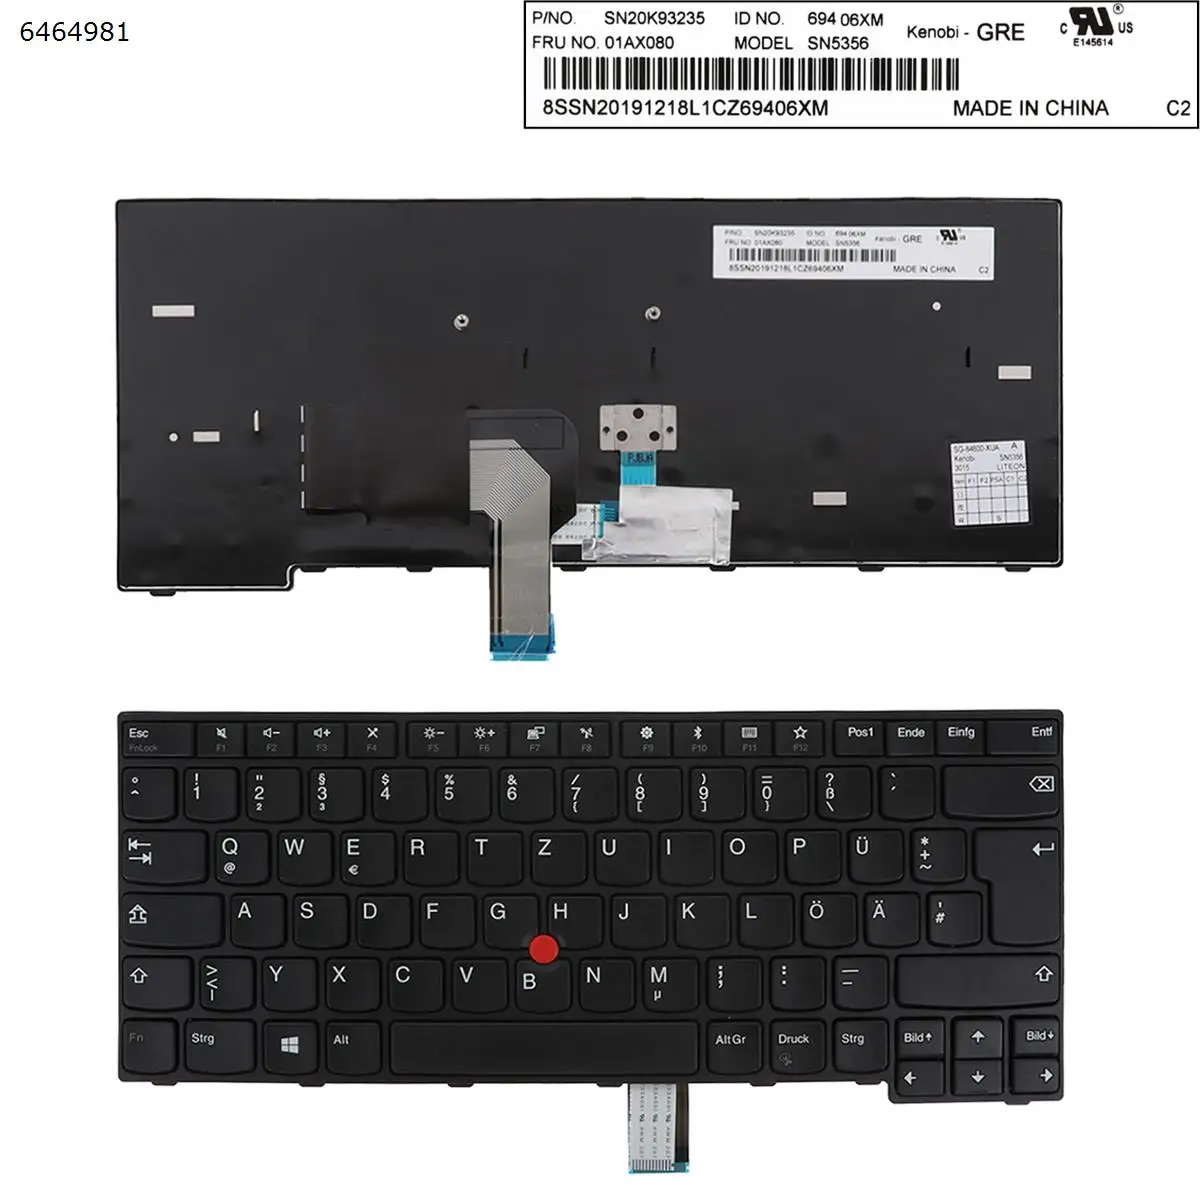 

German QWERTZ New Replacement Keyboard for Lenovo Thinkpad E470 E470c E475 Laptop Black with Pointer